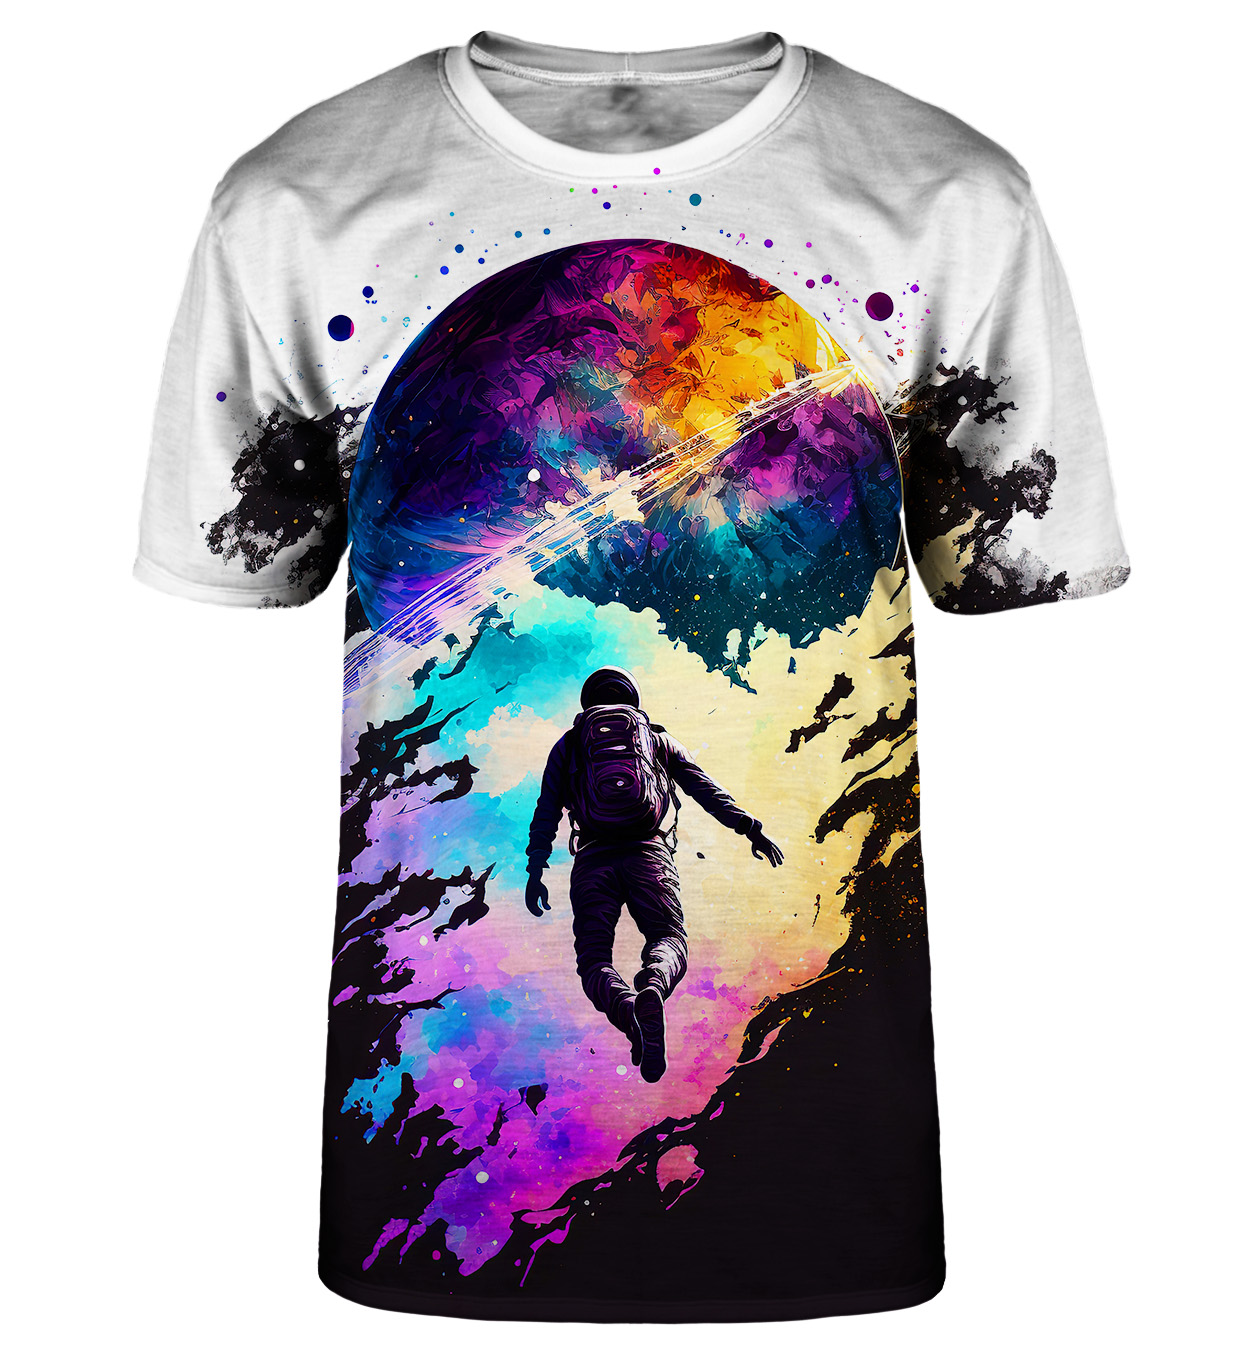 E-shop Searching for Colors T-shirt